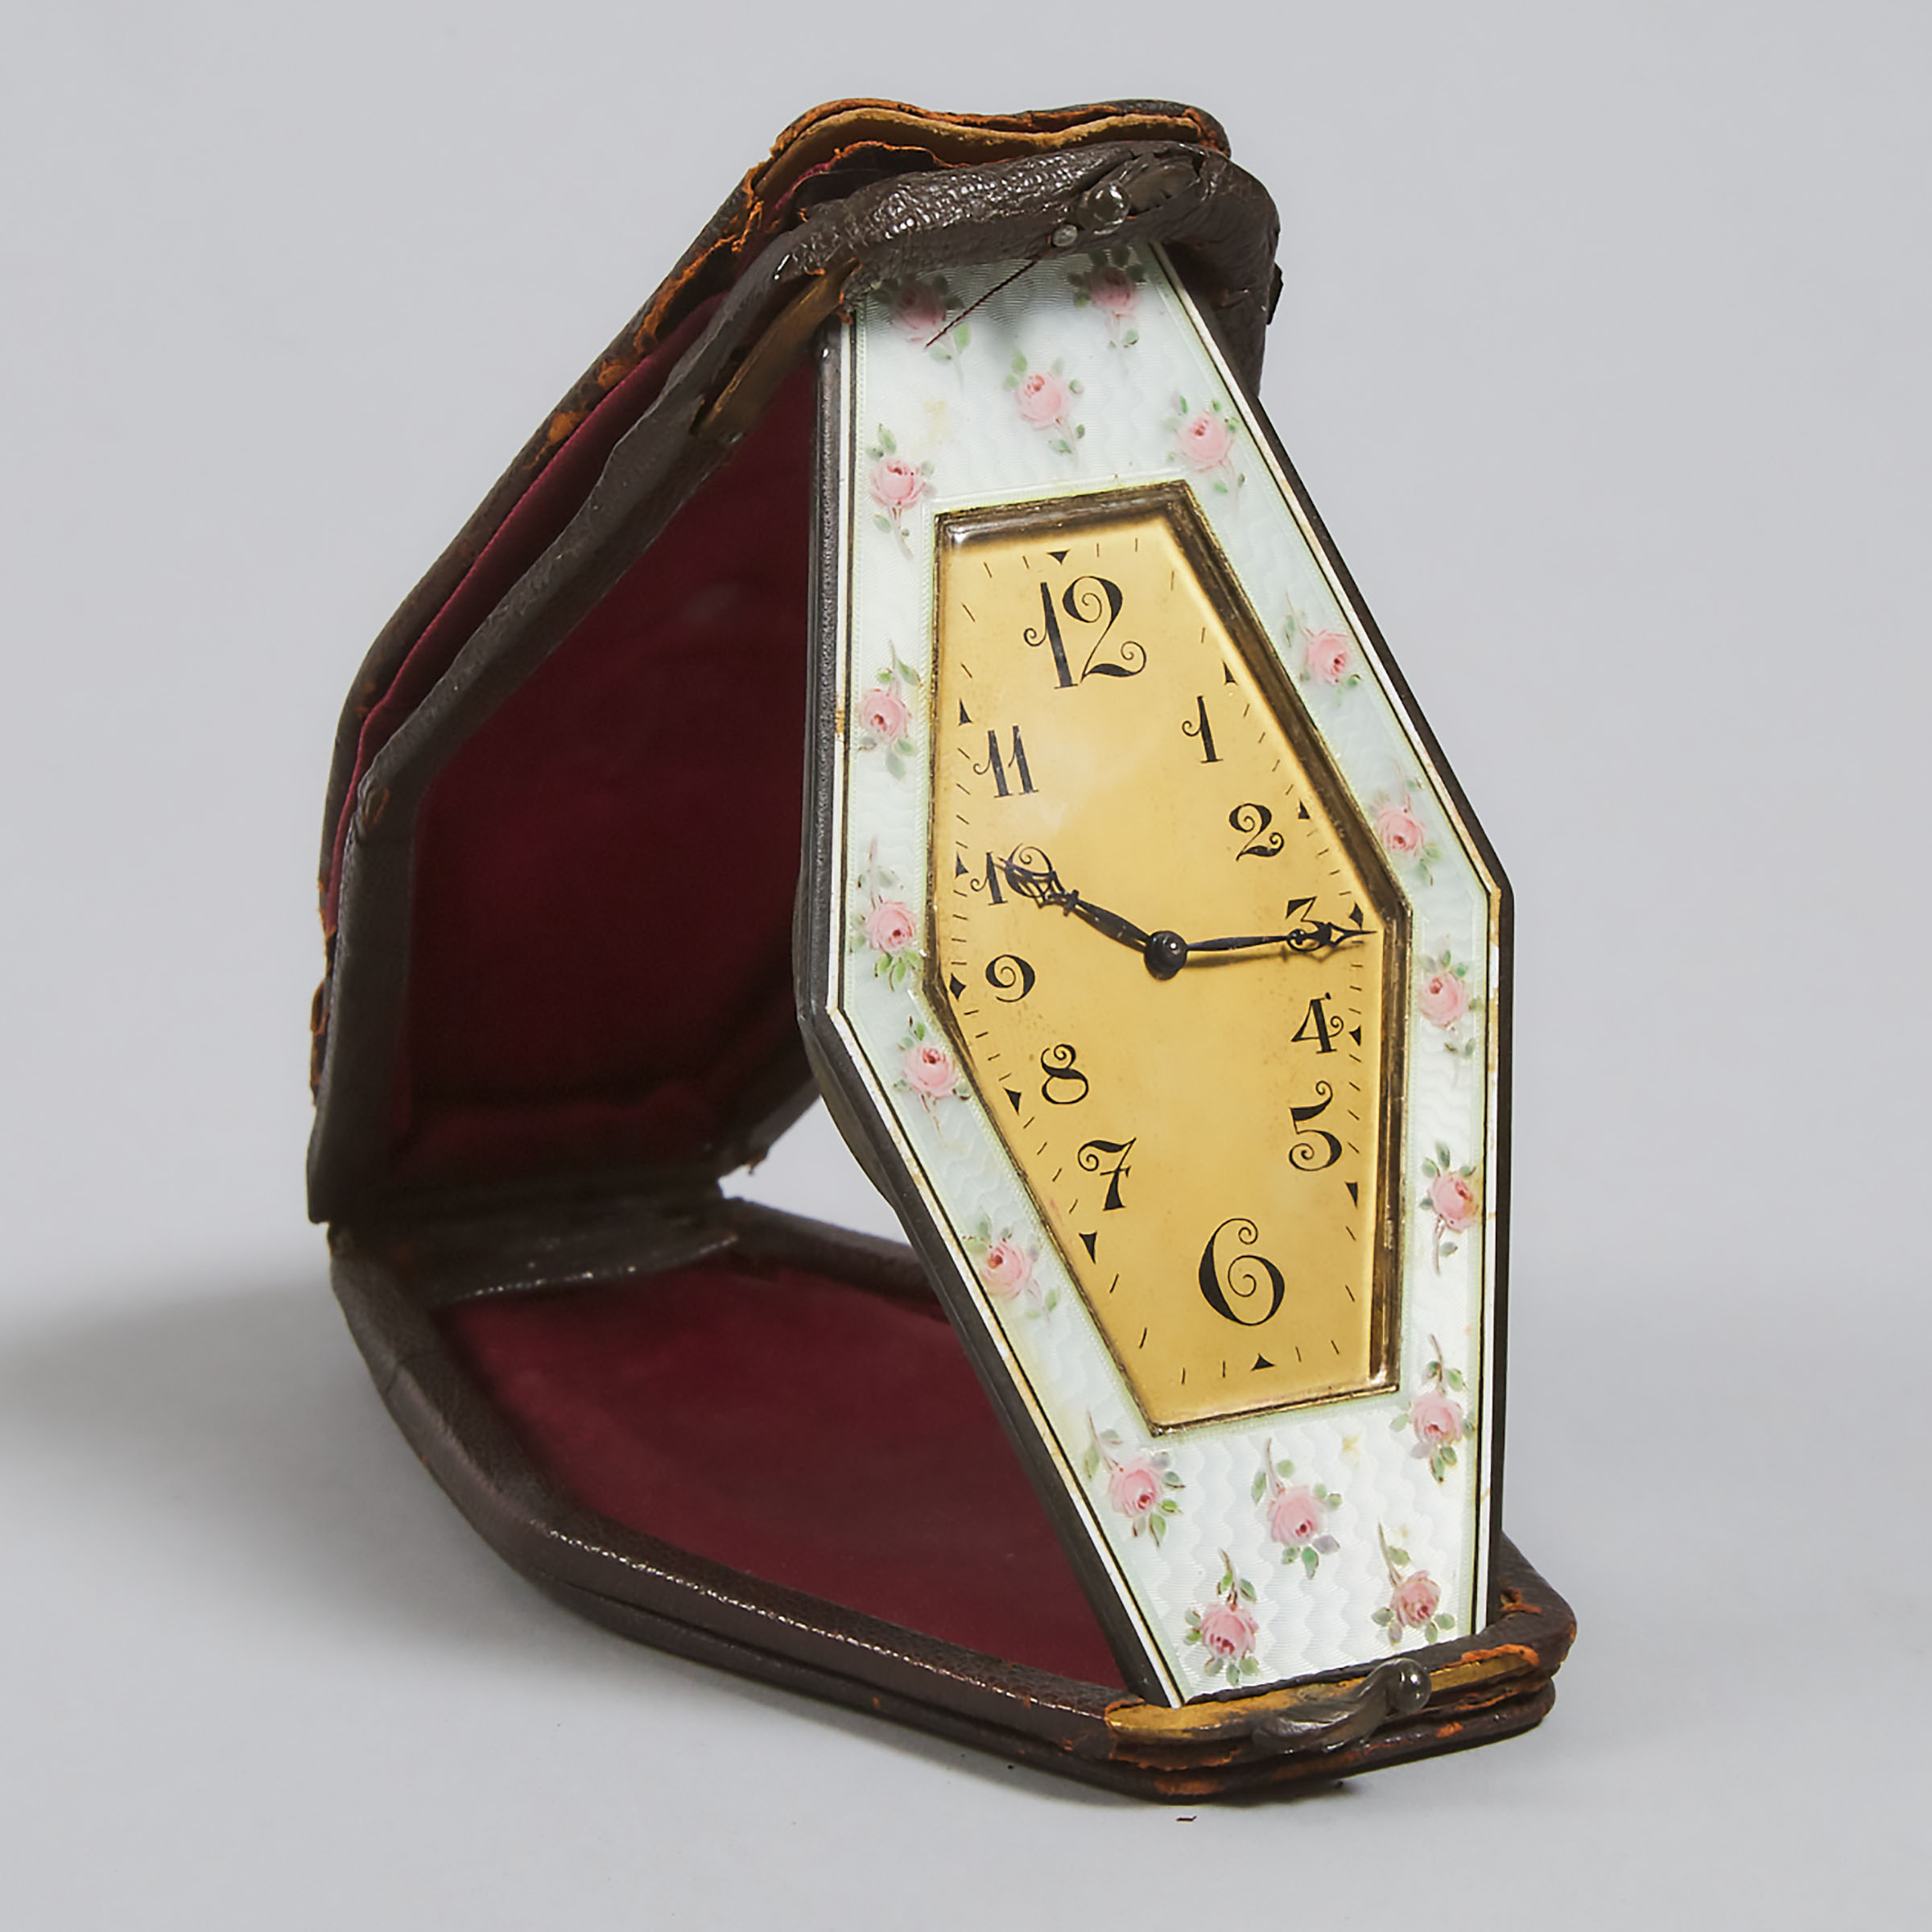 Swiss Enameled Silver Cased Travel Clock, early 20th century